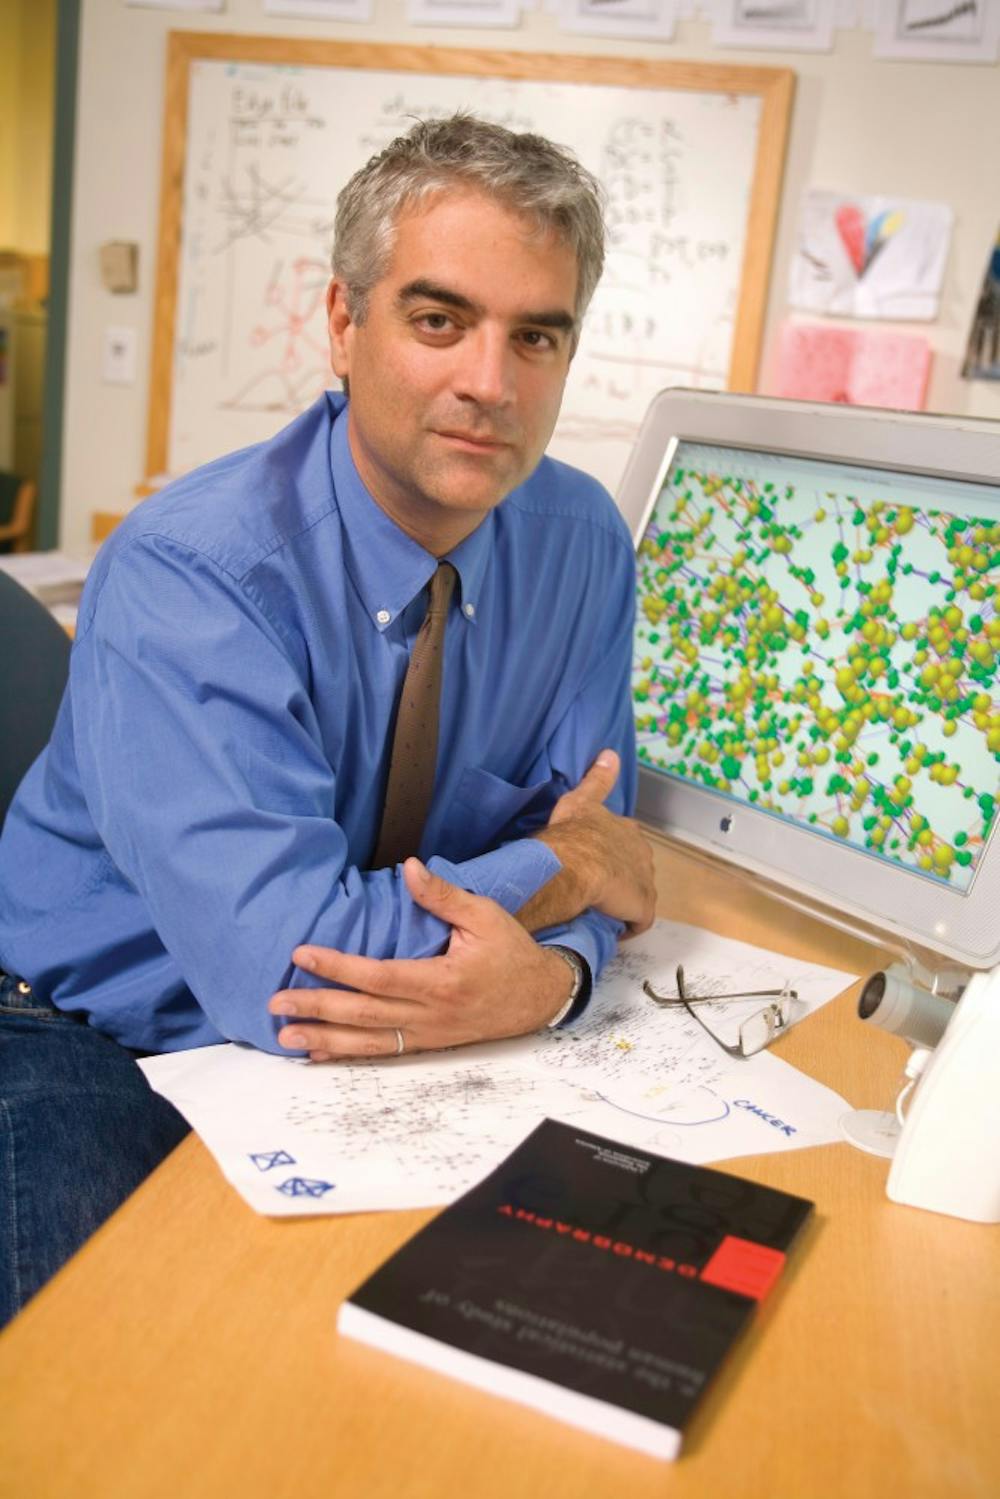 <p><strong></strong><strong>Nicholas Christakis</strong> completed his residency in internal medicine at Penn in 1991. He also began his graduate studies in sociology, earning a master’s degree from the College in 1992 and a doctorate in 1995.</p>